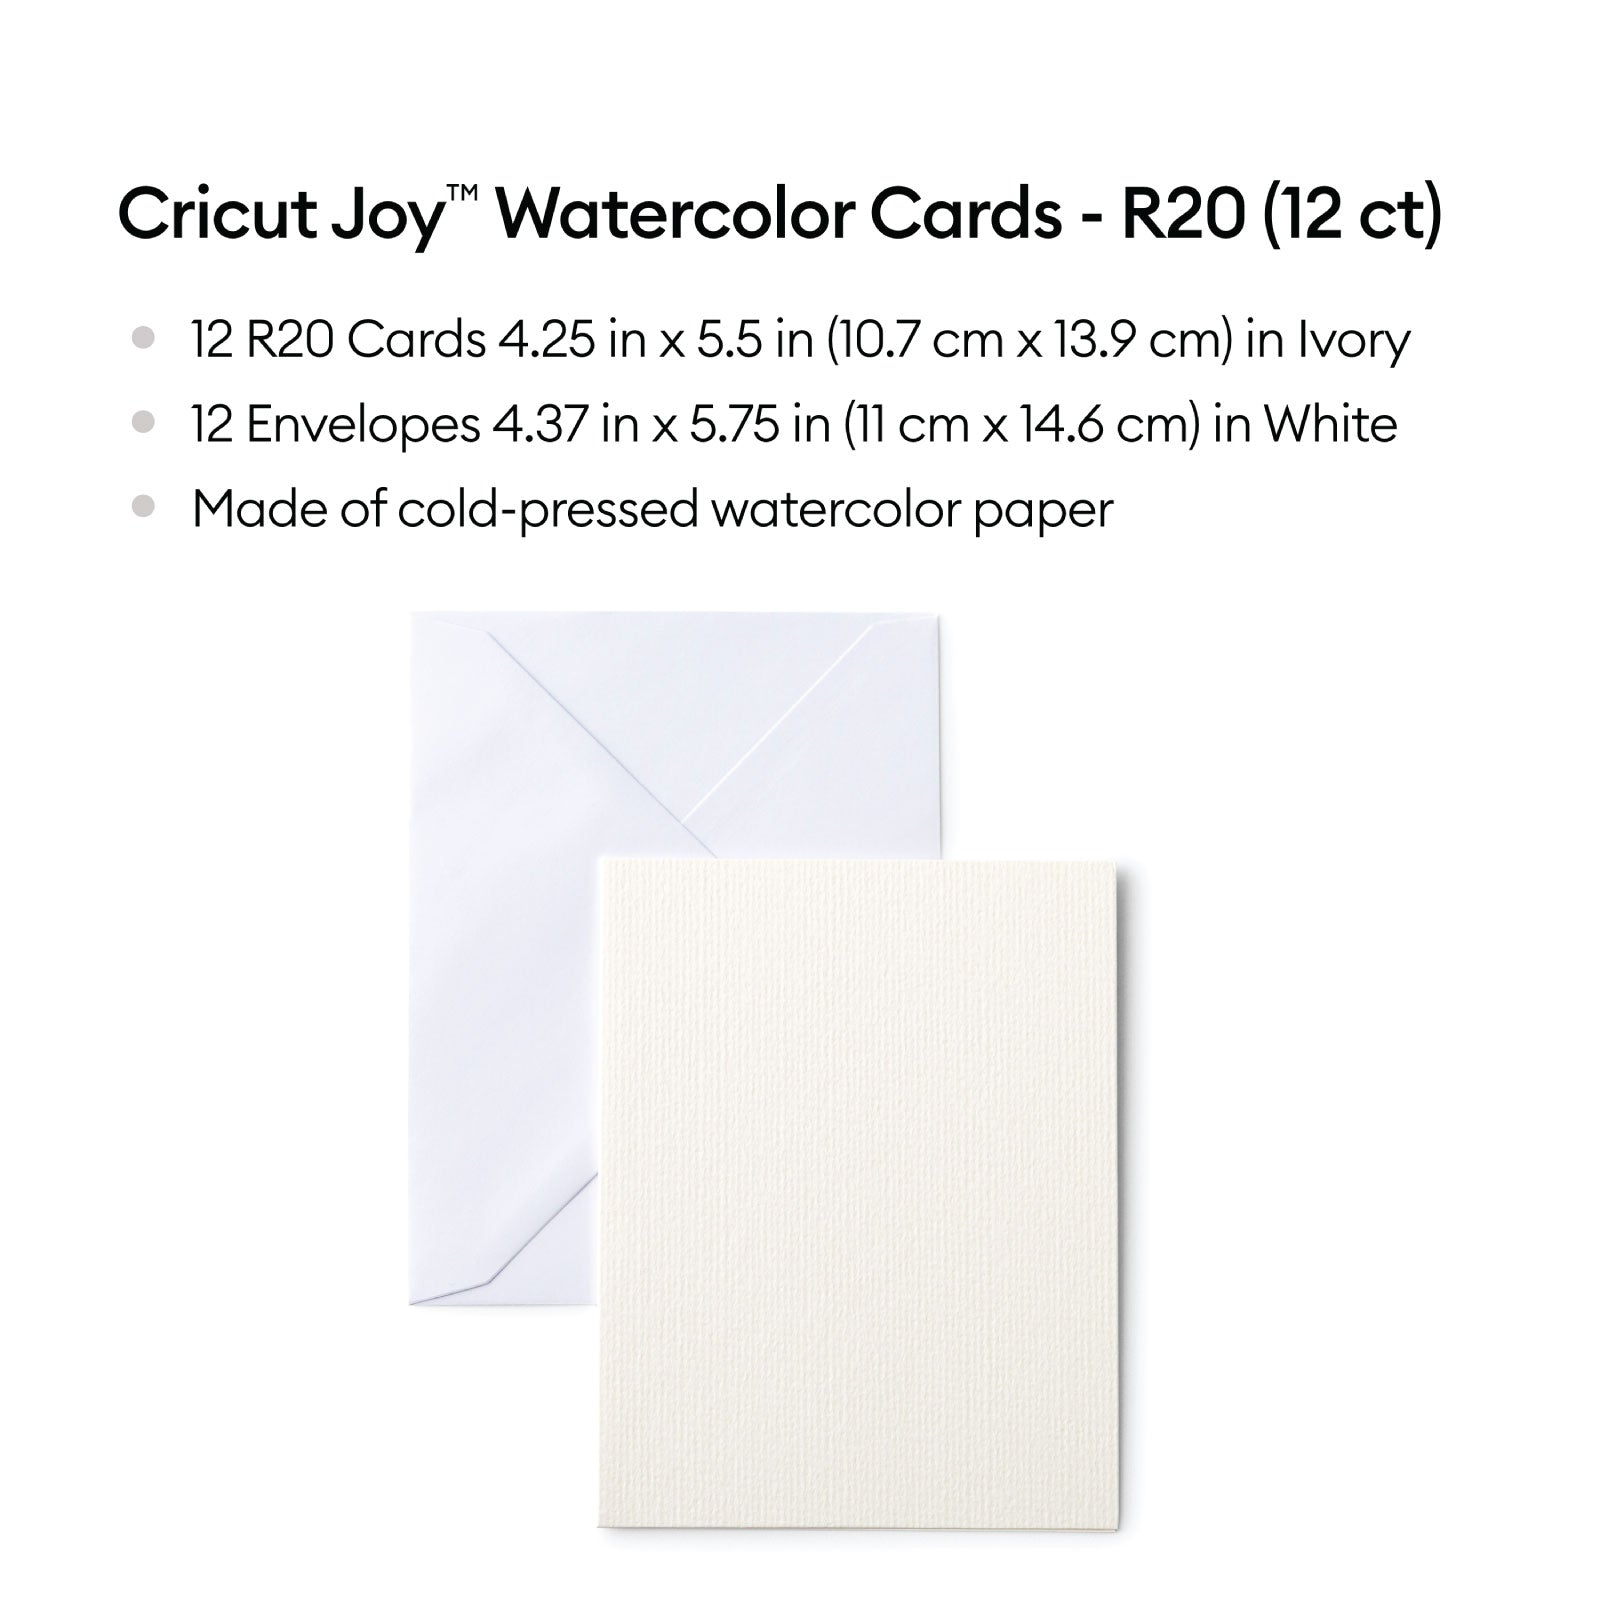 Cricut Watercolor Cards - R20 12 ct Ivory - Damaged Package